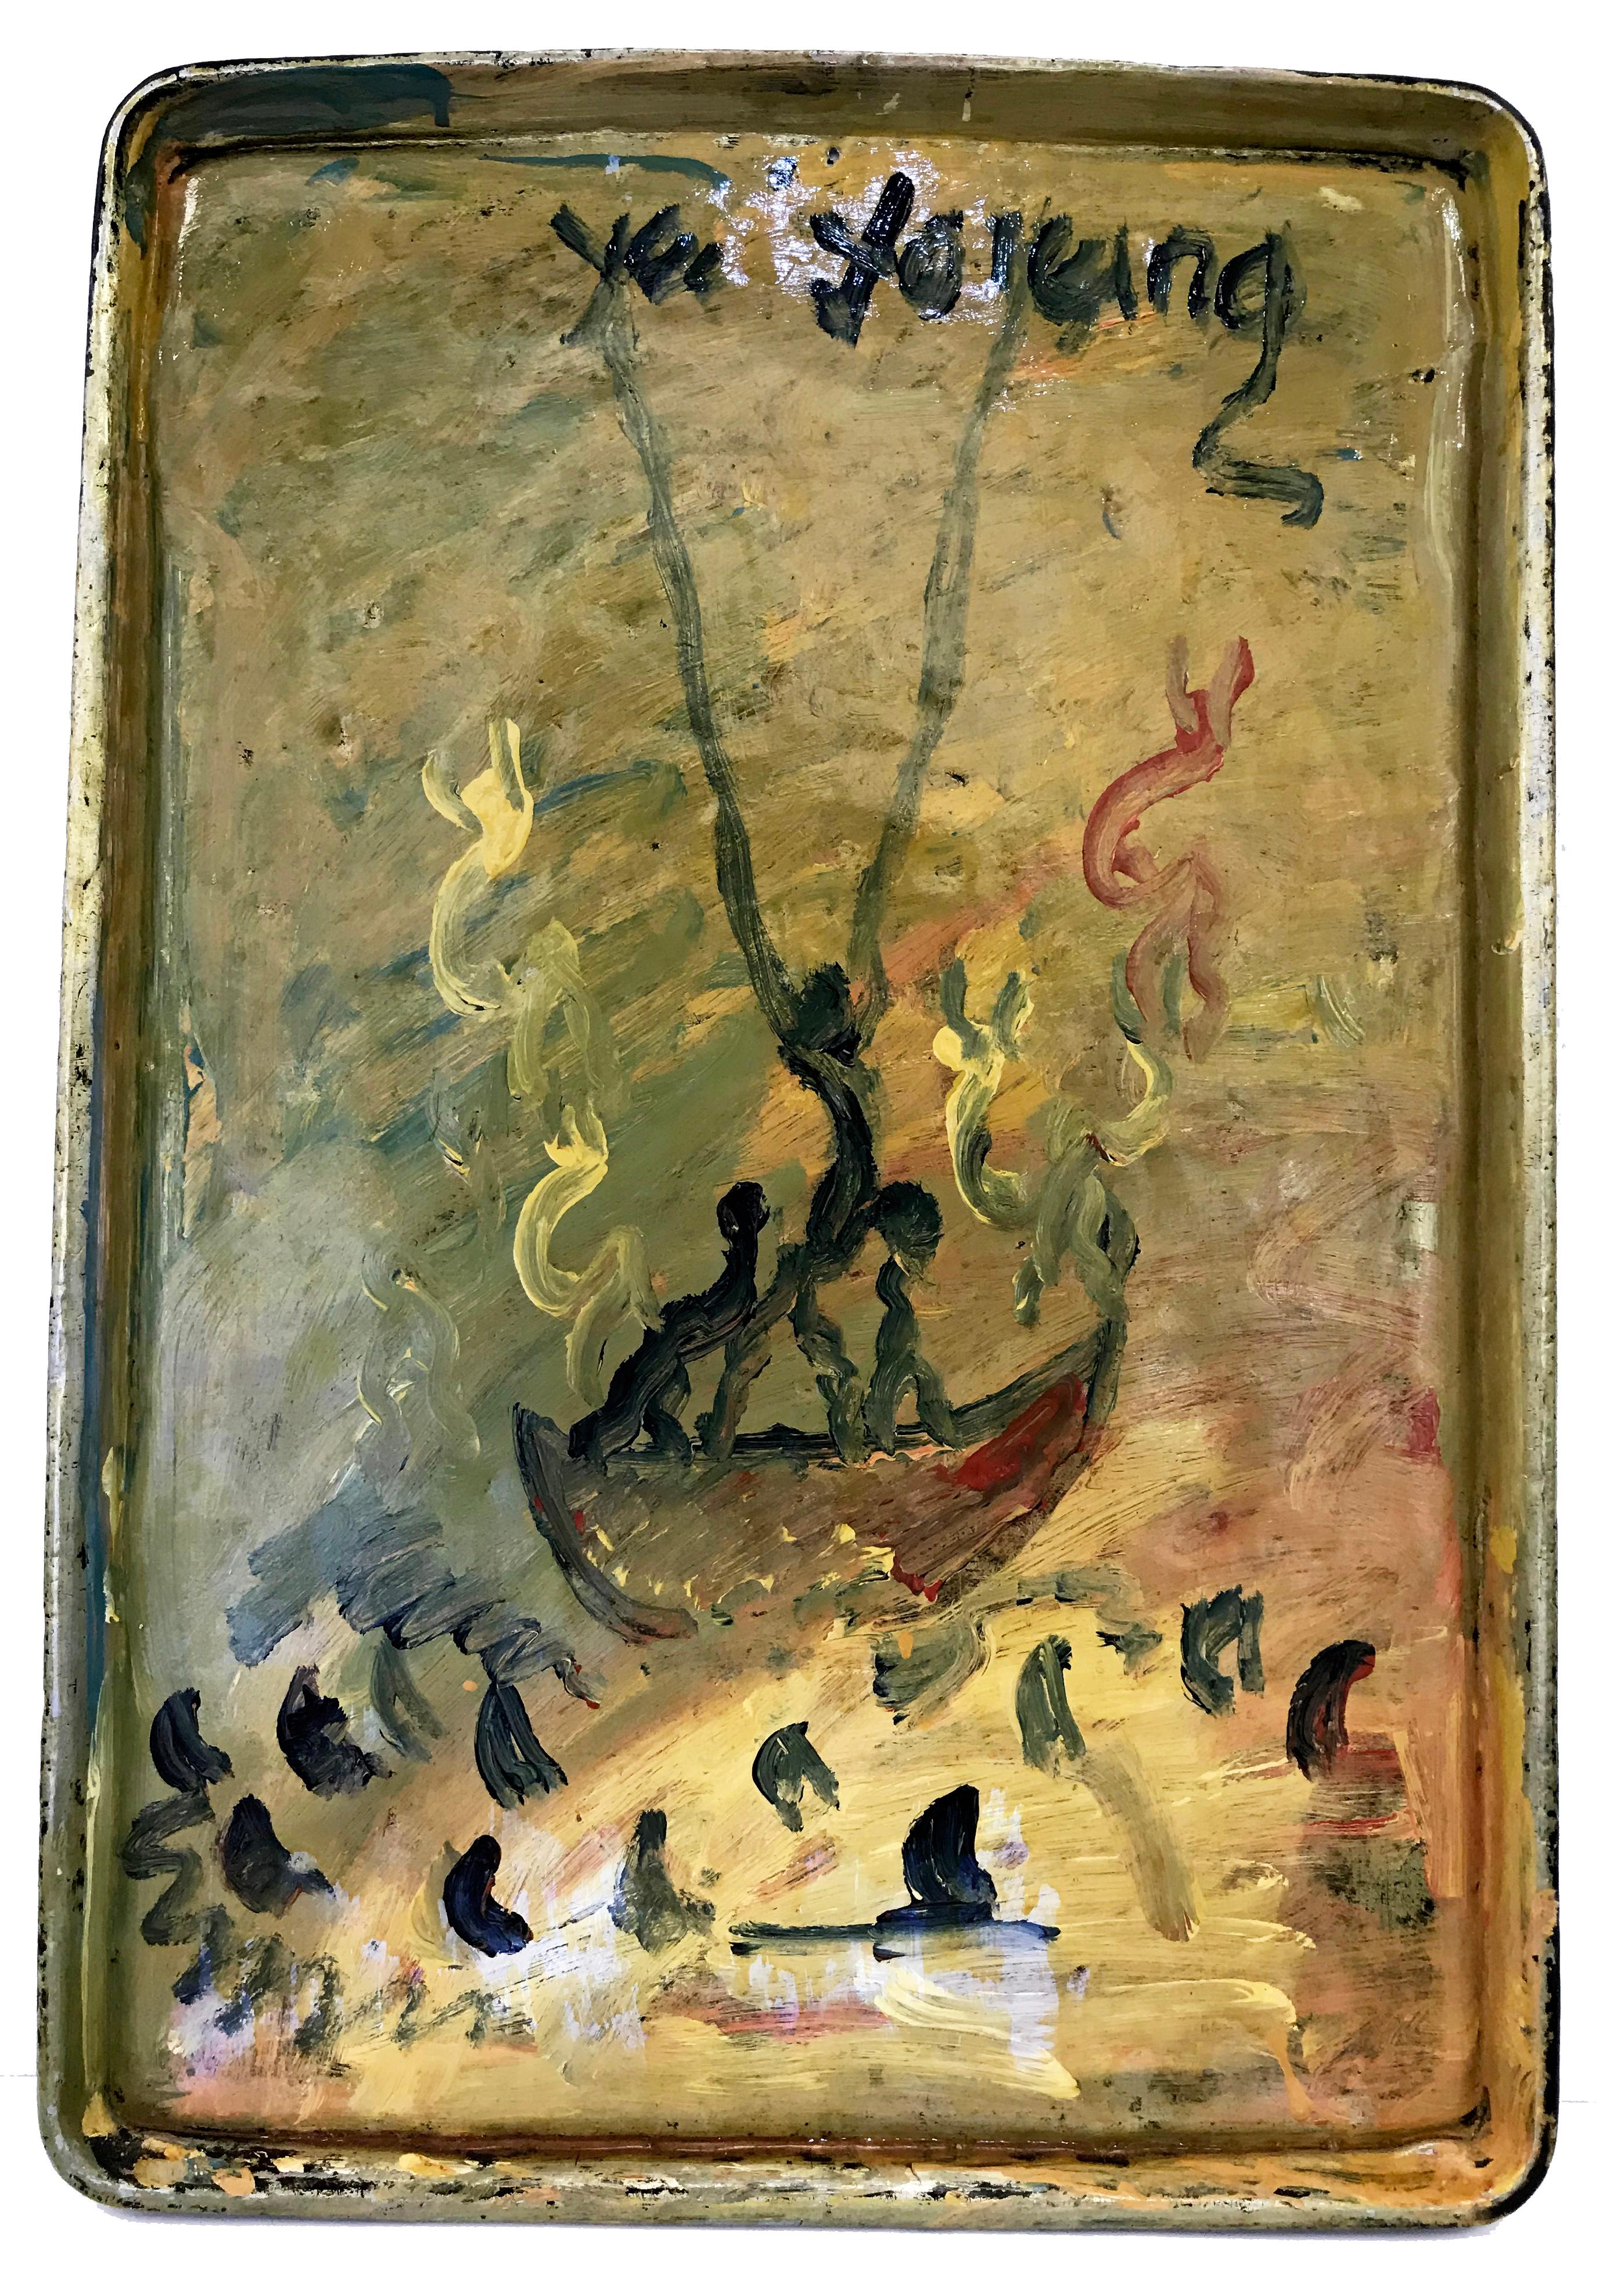 FINAL VOYAGE (PAINTING ON TRAY)